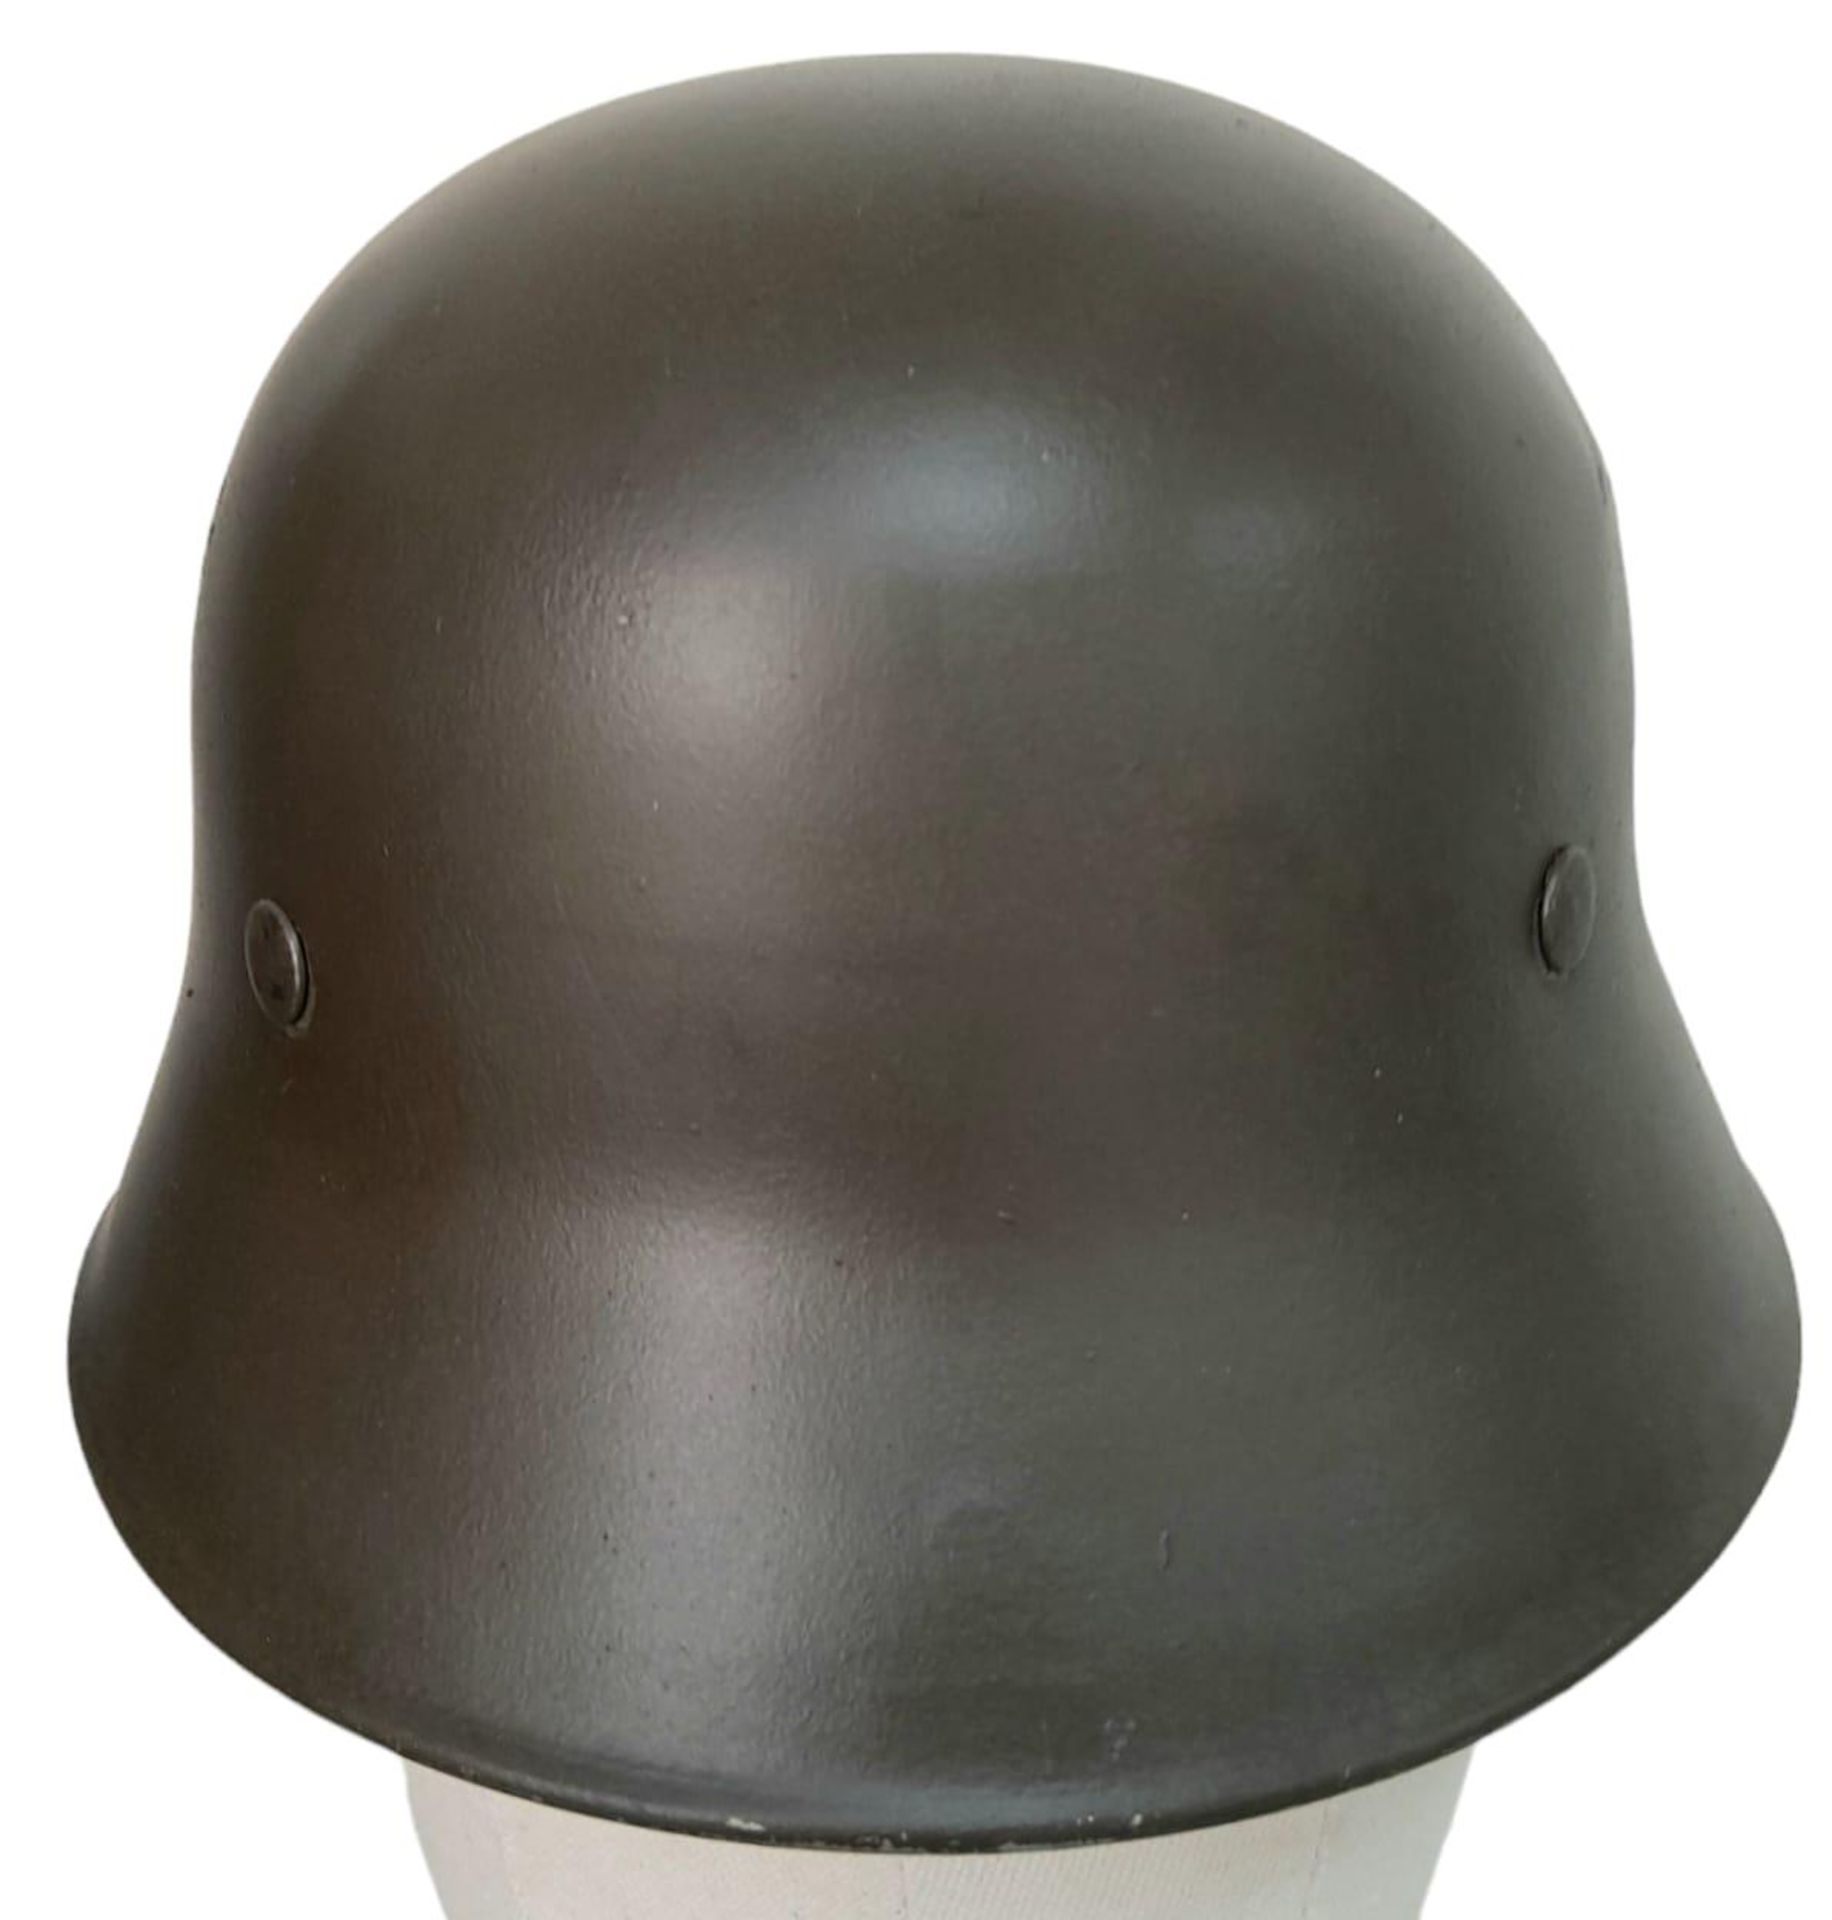 3rd Reich Lightweight Fire Helmet used by the German Aircraft Factory Arado Flugzeugwerke, whose - Image 4 of 5